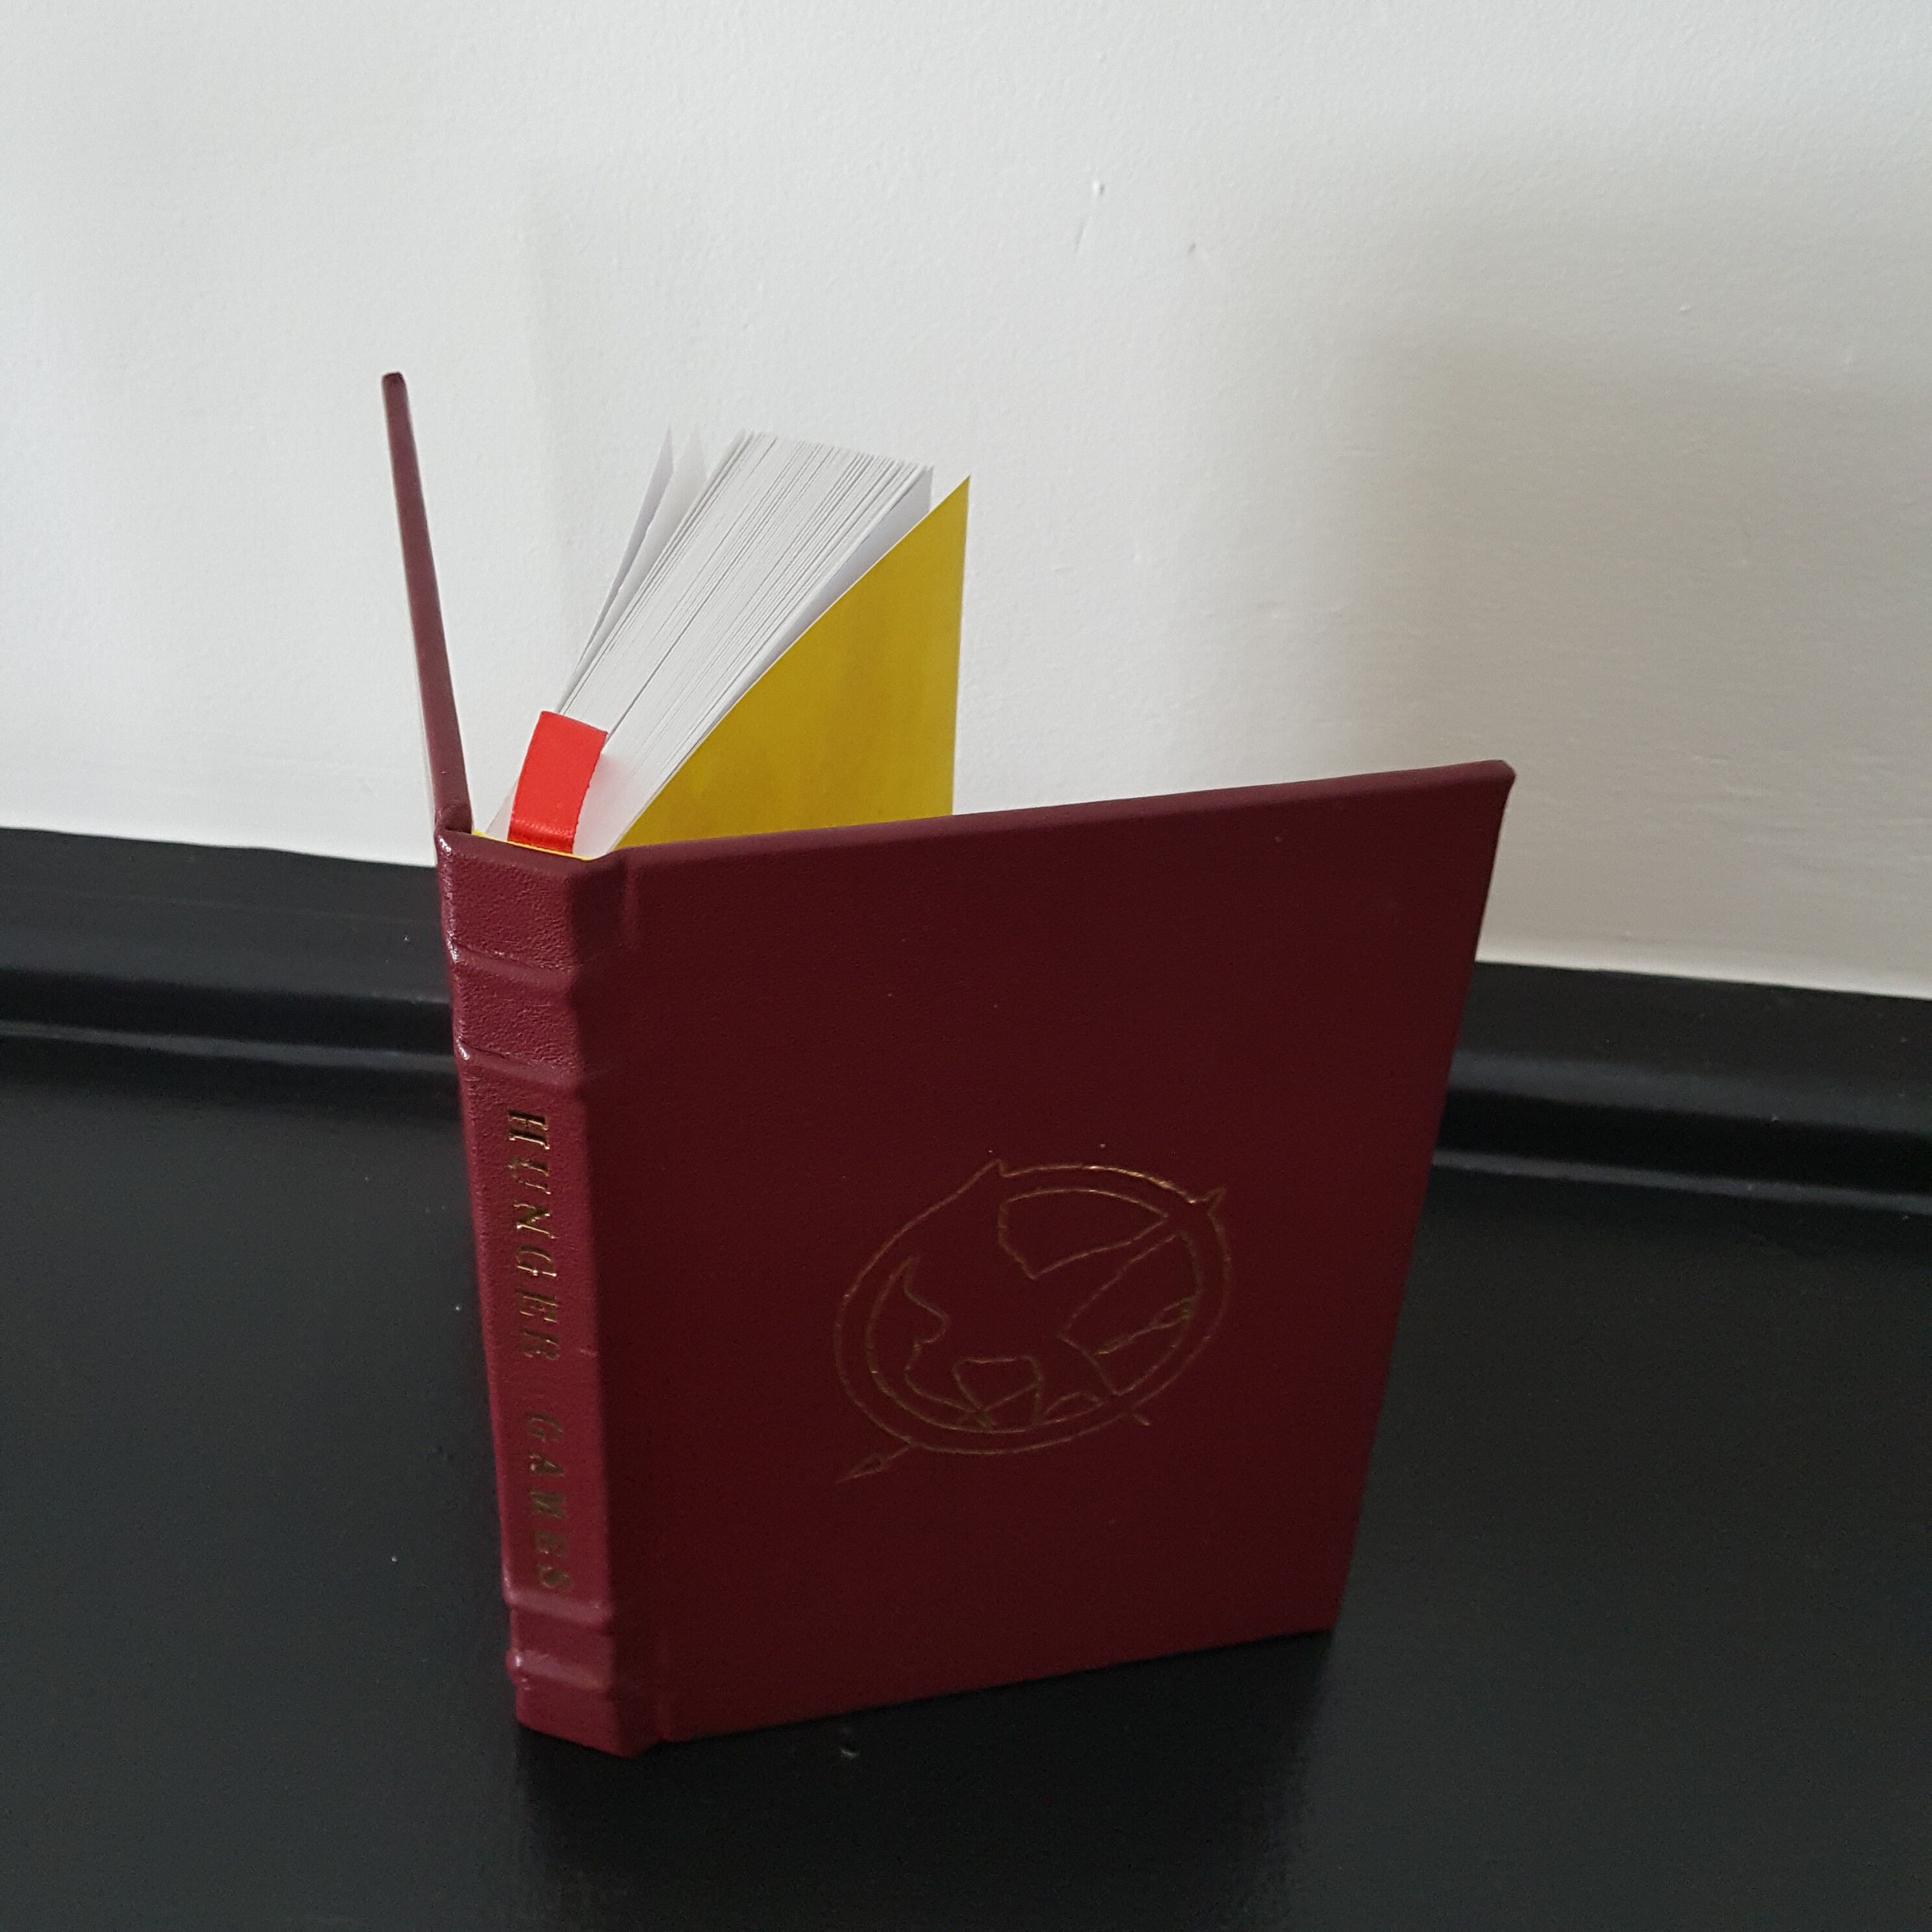 Hunger Games Set of Hardcover Books Handmade Brown Premium Leather-bound  Books 